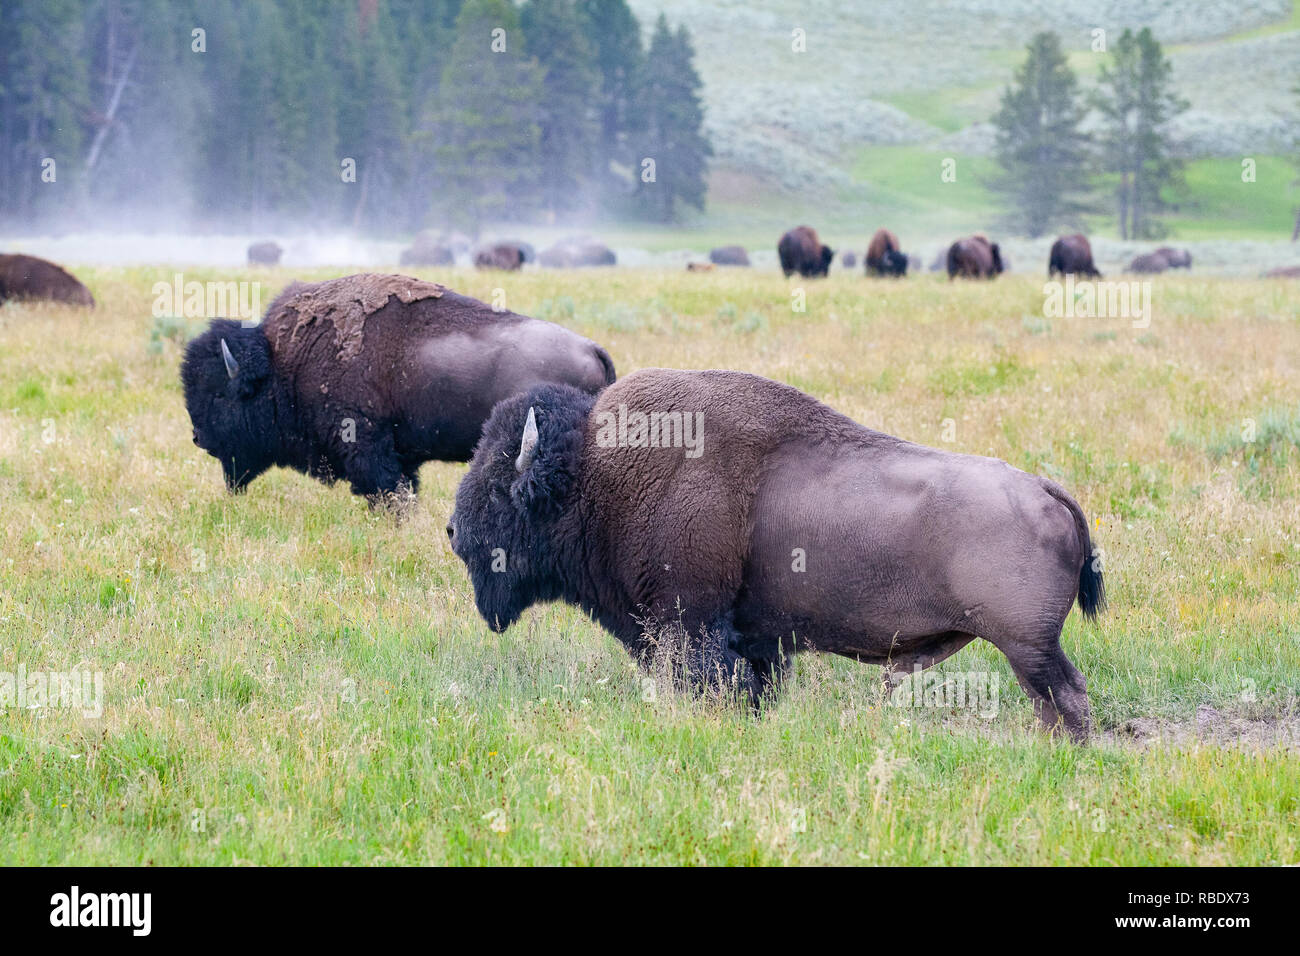 The herd bisons in Yellowstone National Park, Wyoming. USA.  The Yellowstone Park bison herd in Yellowstone National Park is probably the oldest and l Stock Photo